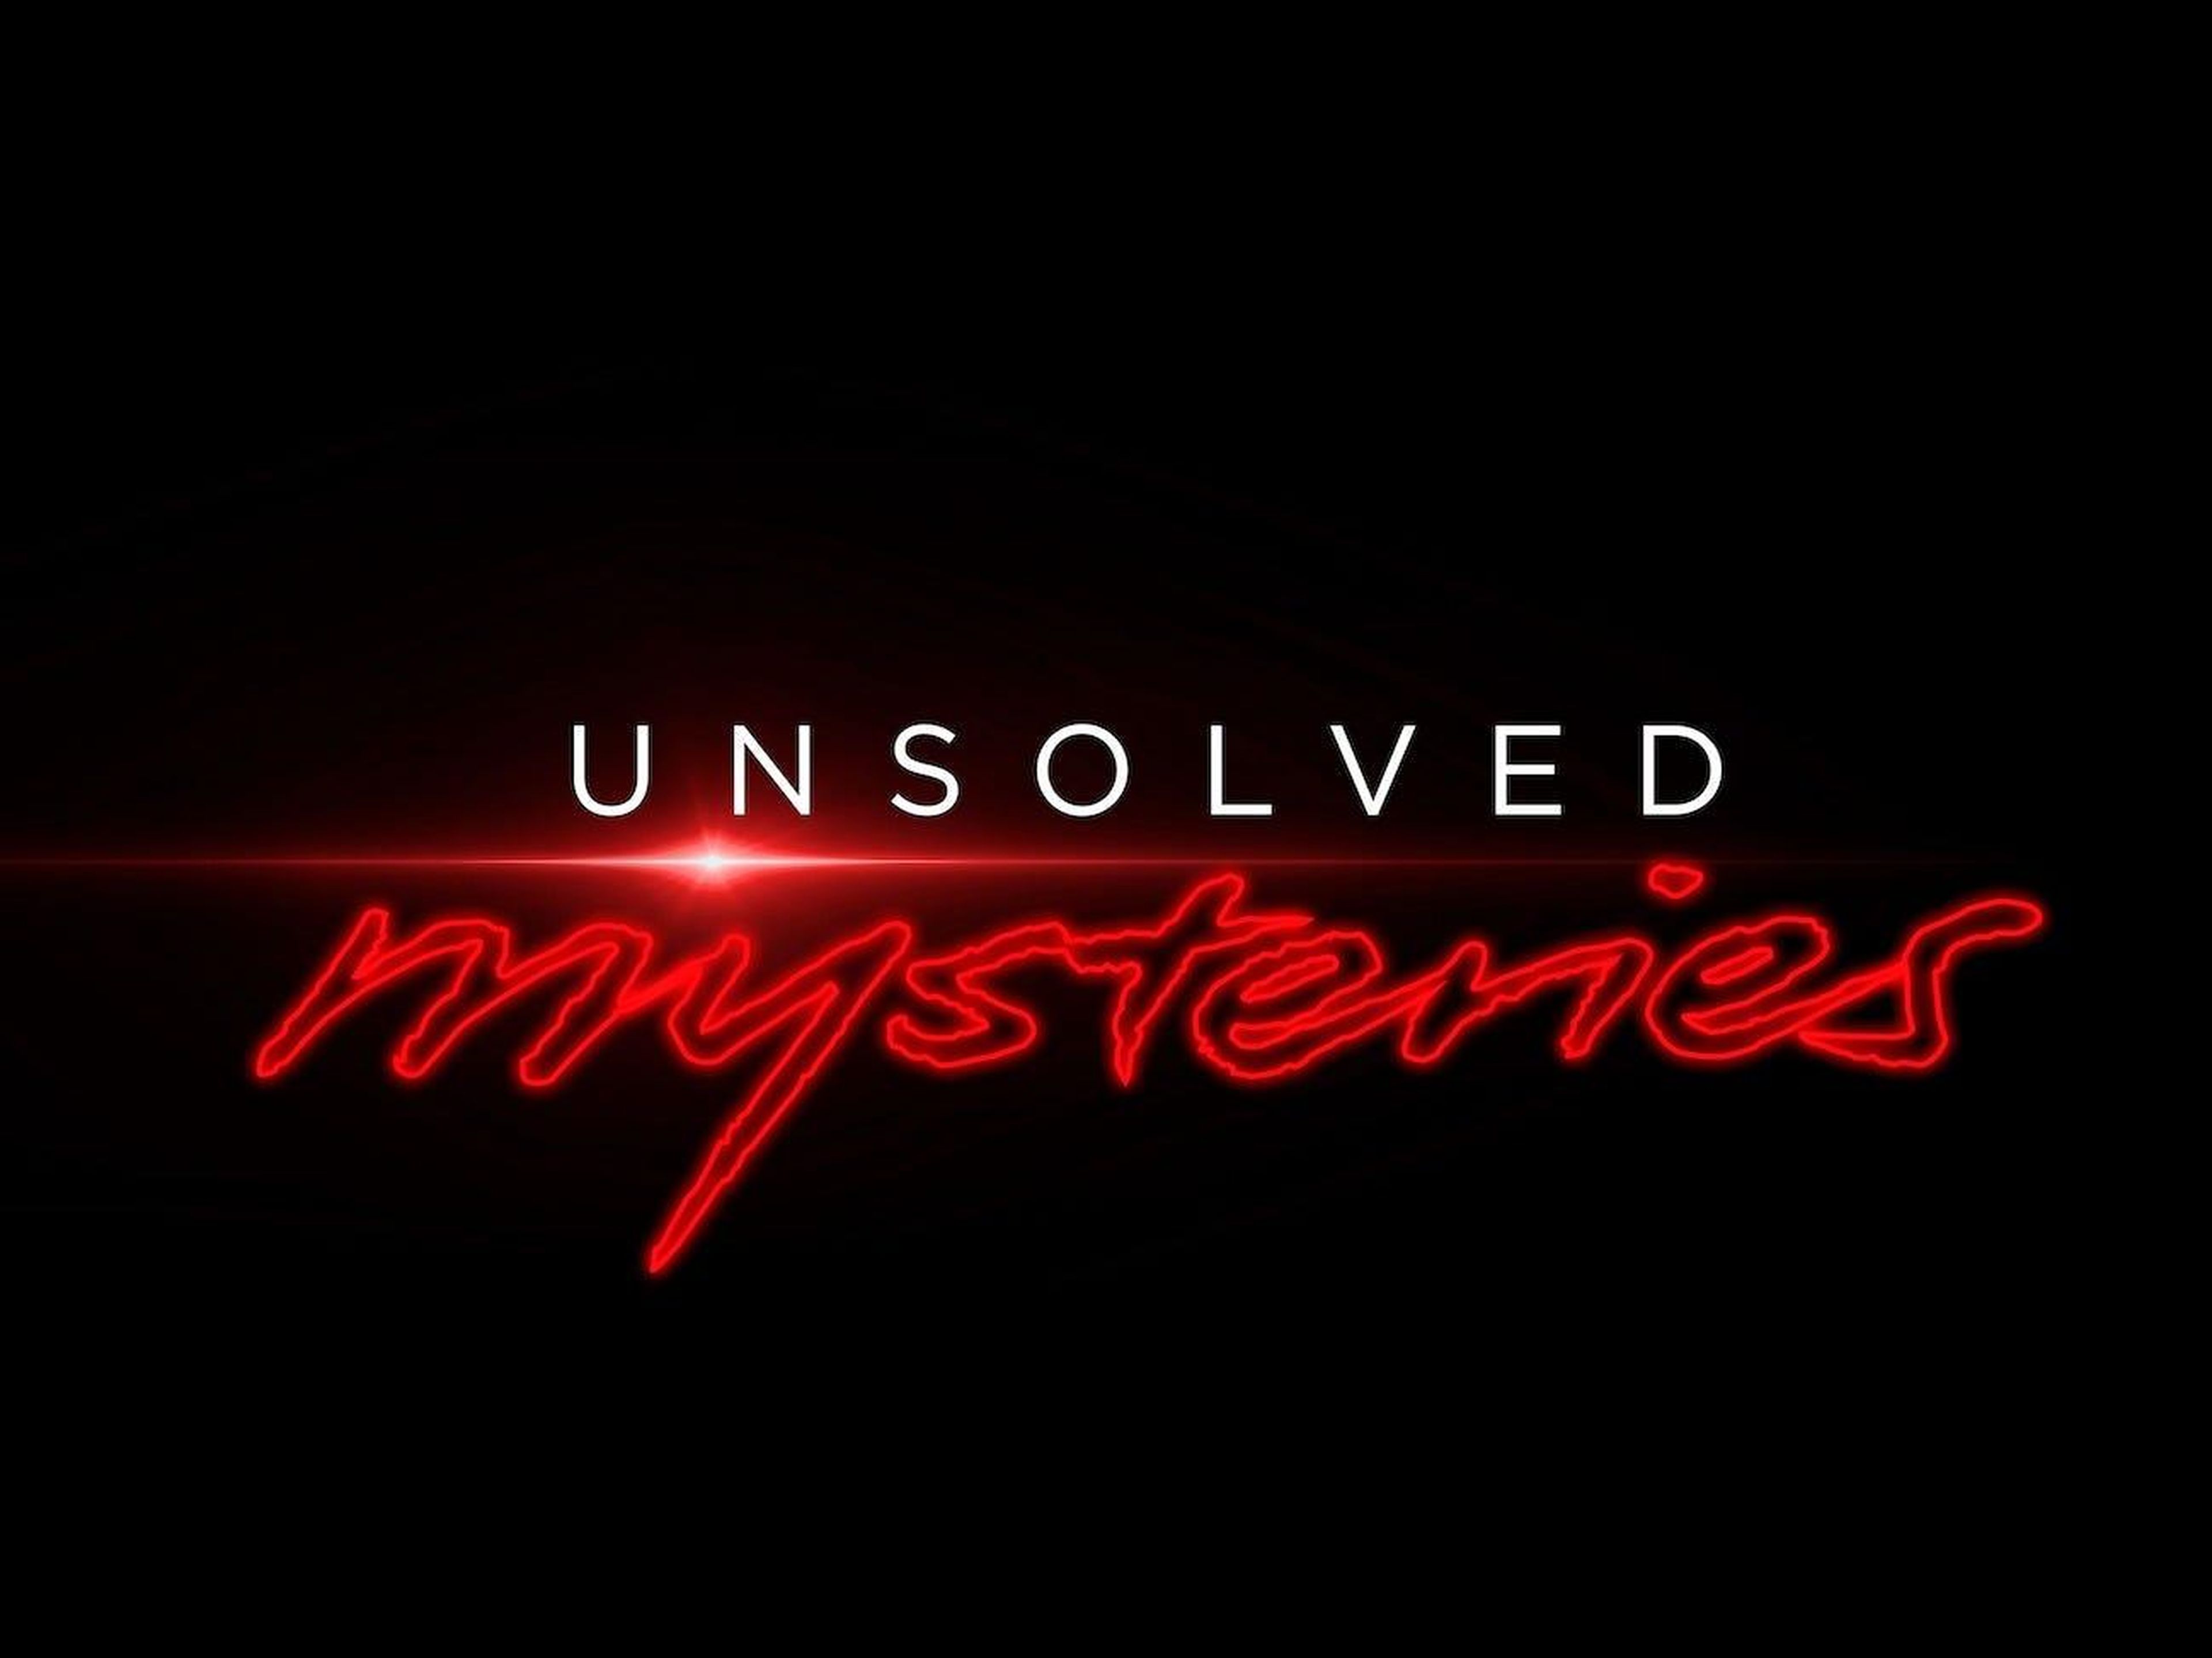 The original "Unsolved Mysteries" aired from 1987 to 1997 on NBC before moving to other networks.